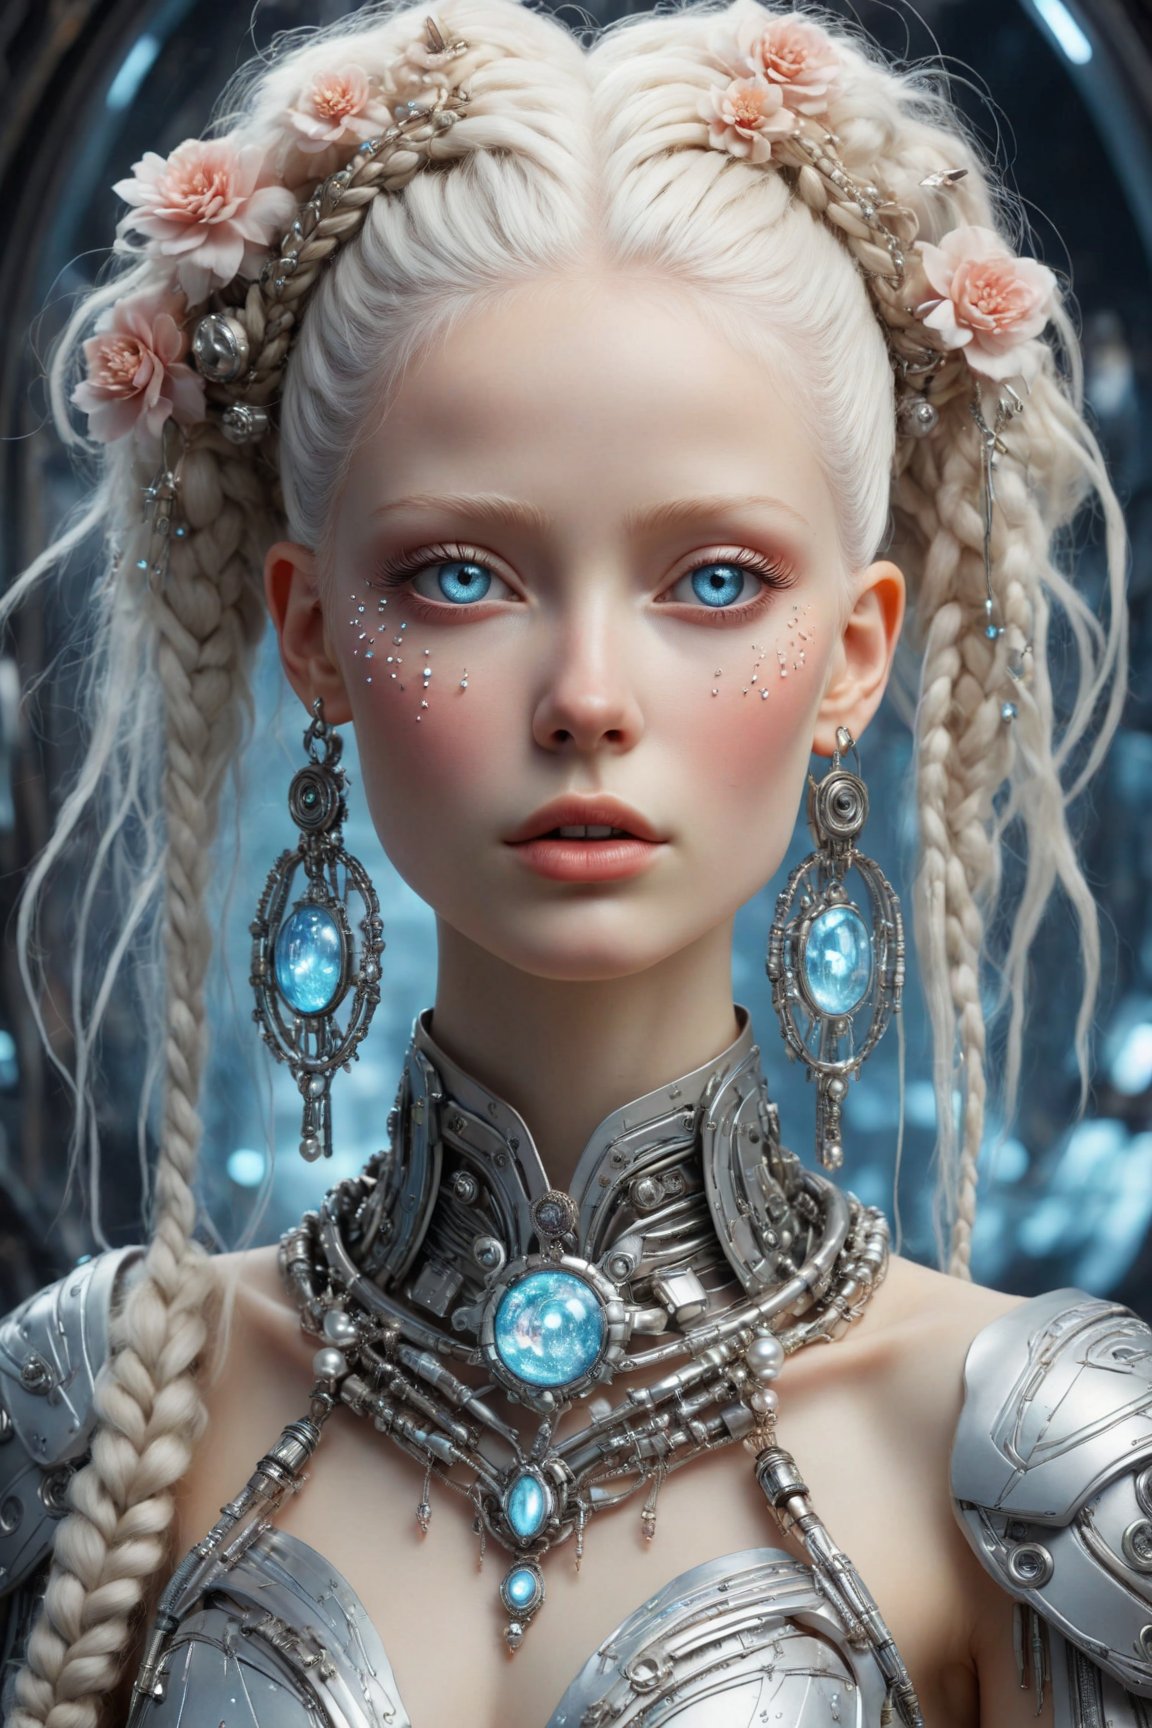 A close-up portrait of an albino woman with pastel tones, depicted in a futuristic style. She has an intricate, elaborate hairstyle with multiple braids adorned with pearls and flowers, but with a modern twist. Her hair is white, and she has blue eyes with light freckles on her face. She is dressed in an opulent, high-tech outfit with metallic and holographic elements, and delicate jewelry with futuristic designs. The background is a sleek, high-tech interior with soft, ambient lighting that highlights the details of her attire and accessories. The overall aesthetic blends fantasy and science fiction, emphasizing intricate craftsmanship and a serene expression.